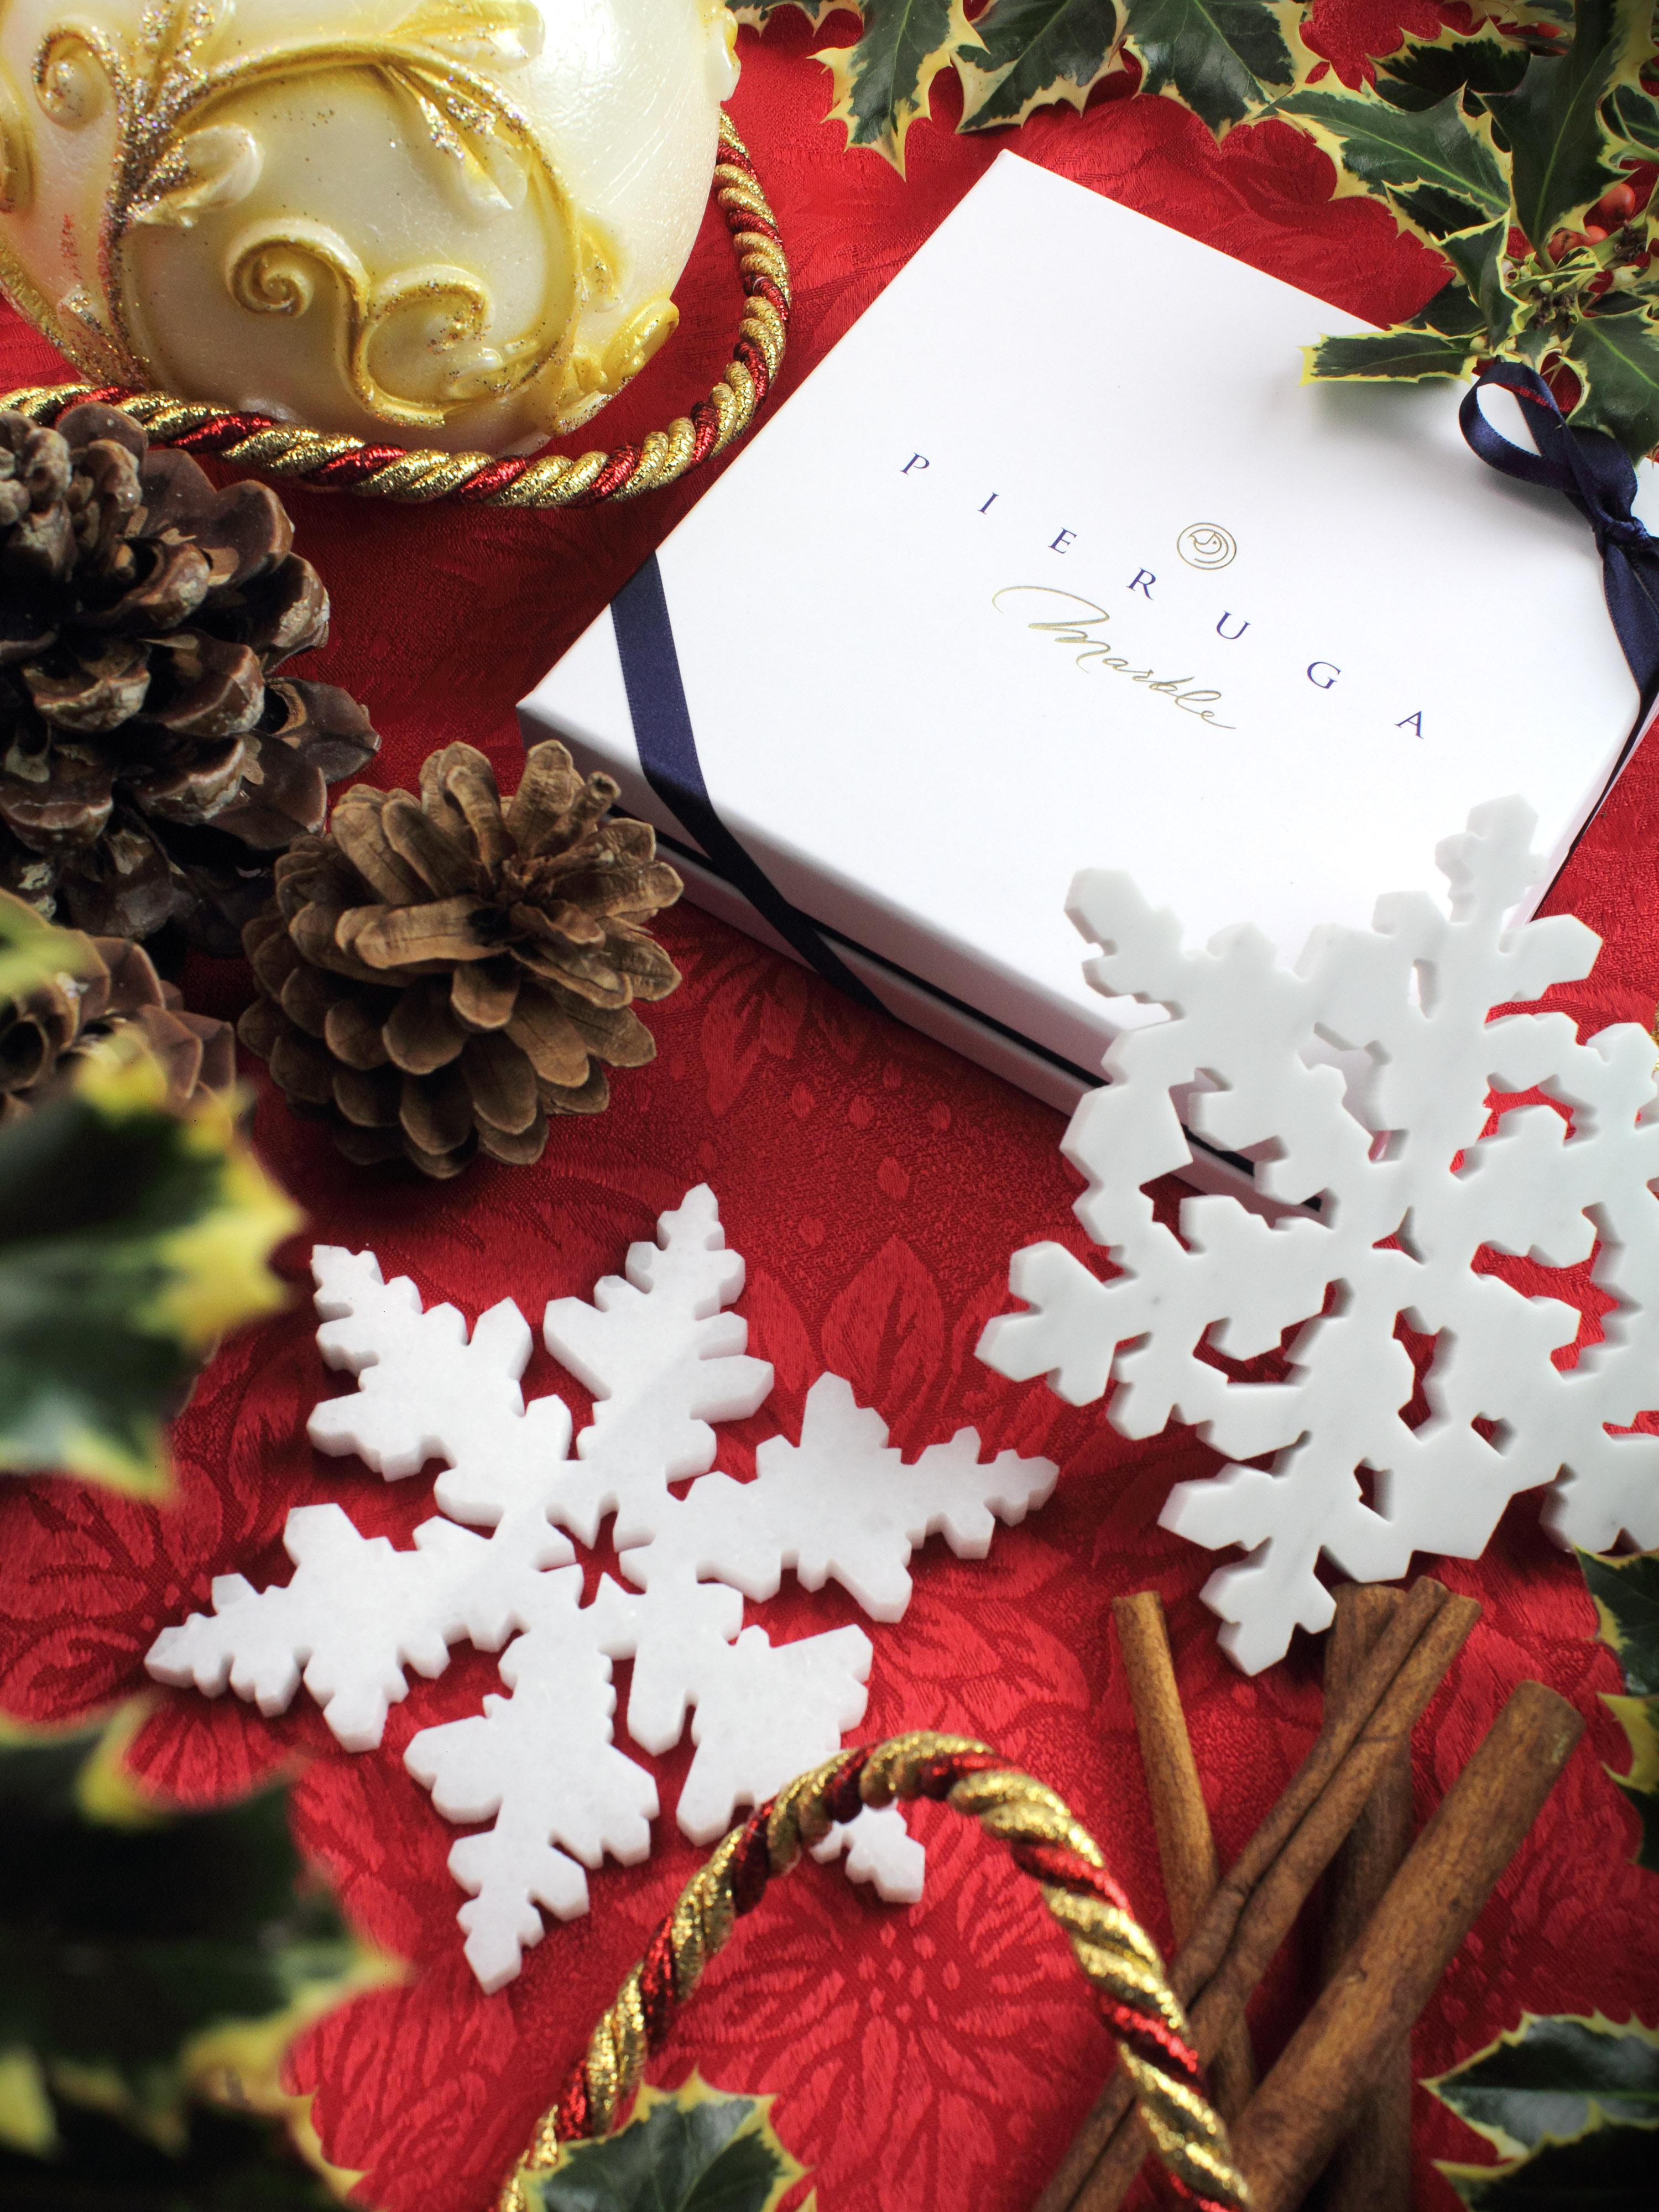 This 'Winter wonderland Snowflake' coaster in White Marble,  inspired by ice crystals, are the perfect tasteful gift for the winter and Christmas period.
Coaster in polished absolute crystalline white marble from Italy.
Thanks to their shape and